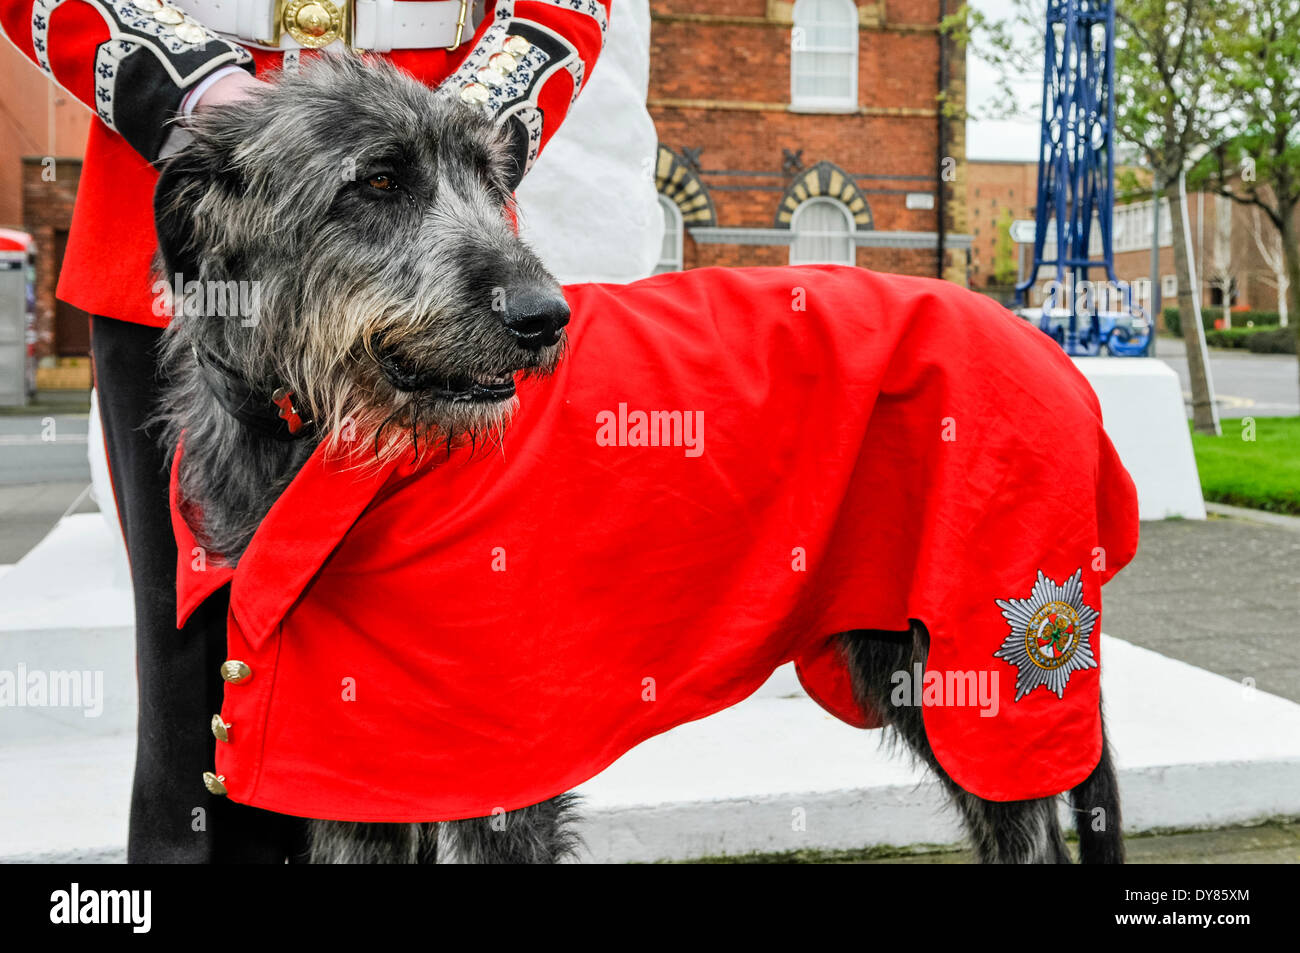 Holywood, Northern Ireland. 9 Apr 2014 - Domhnall (pronounced 'Donal'), the Irish Guards’ 16th Regimental Mascot Irish Wolfhound wears the coat presented to him yesterday by the Irish President, Michael D. Higgins in Windsor during his state visit to the UK.  Accompanying him is his handler, Drummer David Steed. Credit:  Stephen Barnes/Alamy Live News Stock Photo